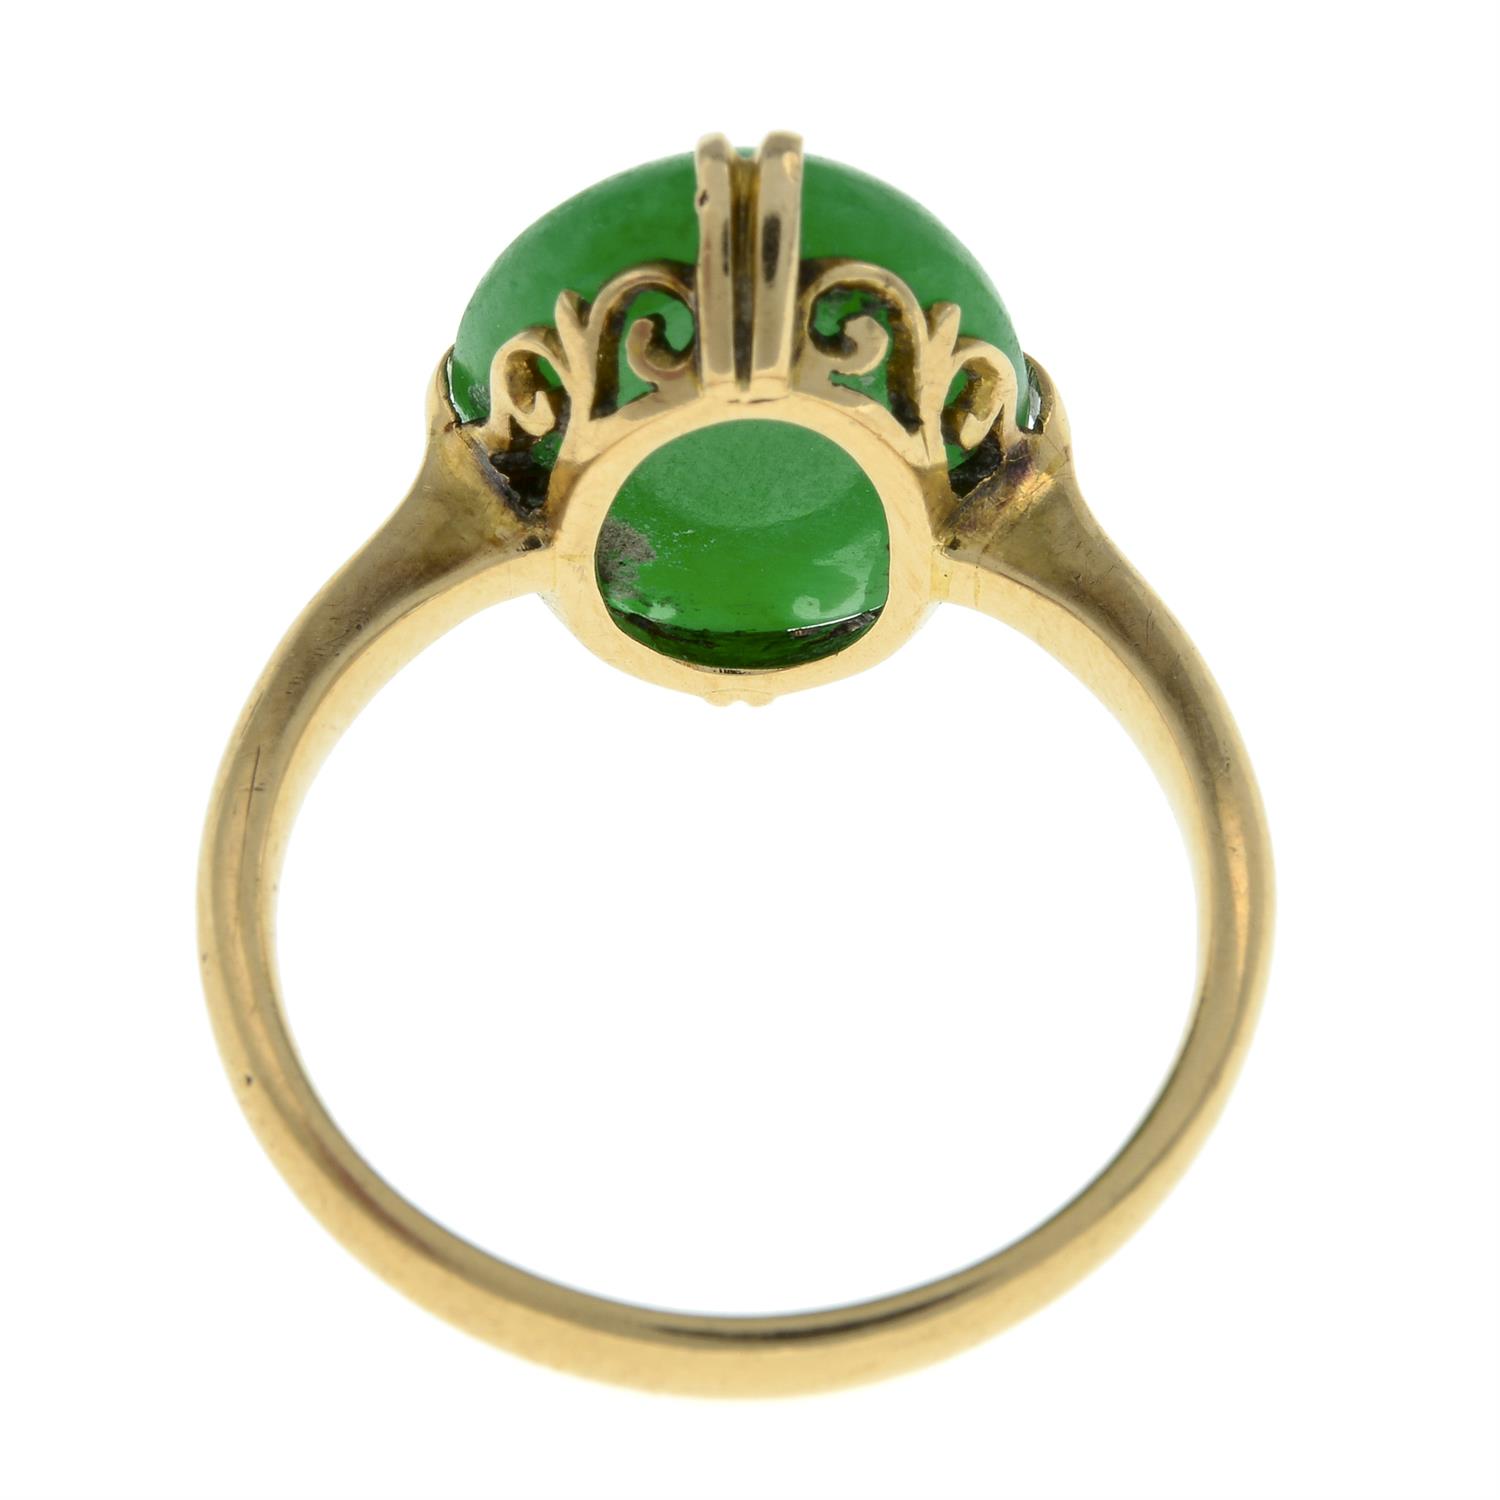 Early to mid 20th century gold jade ring - Image 3 of 6